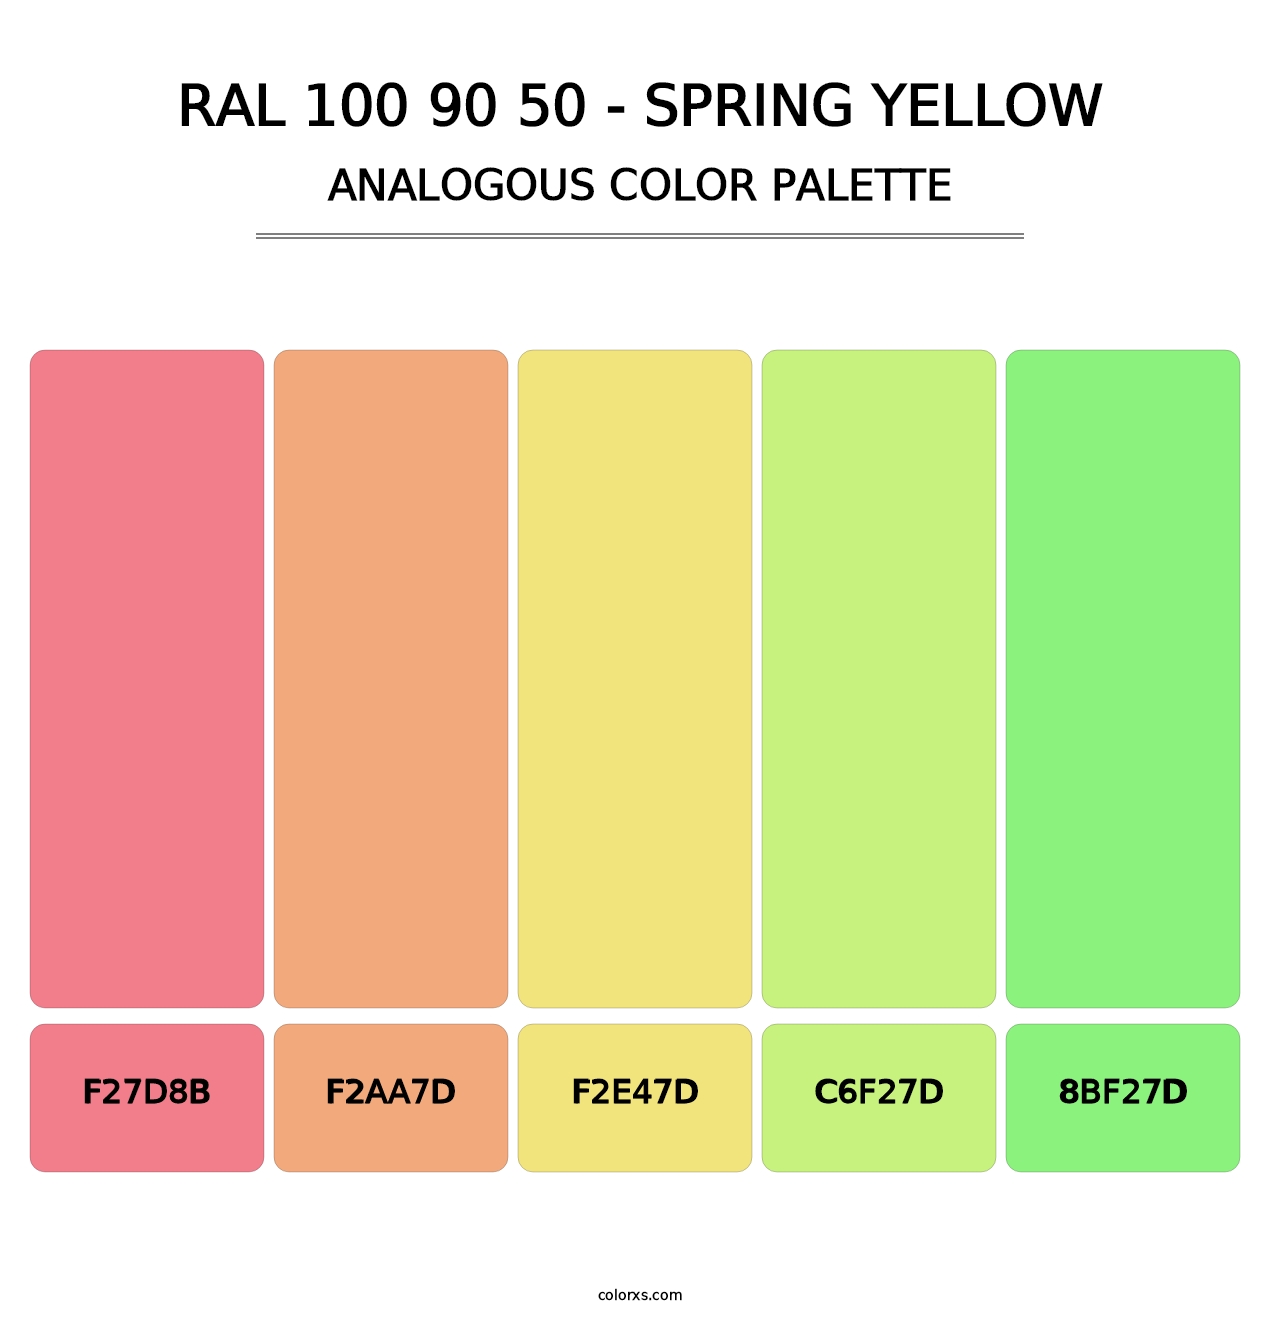 RAL 100 90 50 - Spring Yellow - Analogous Color Palette